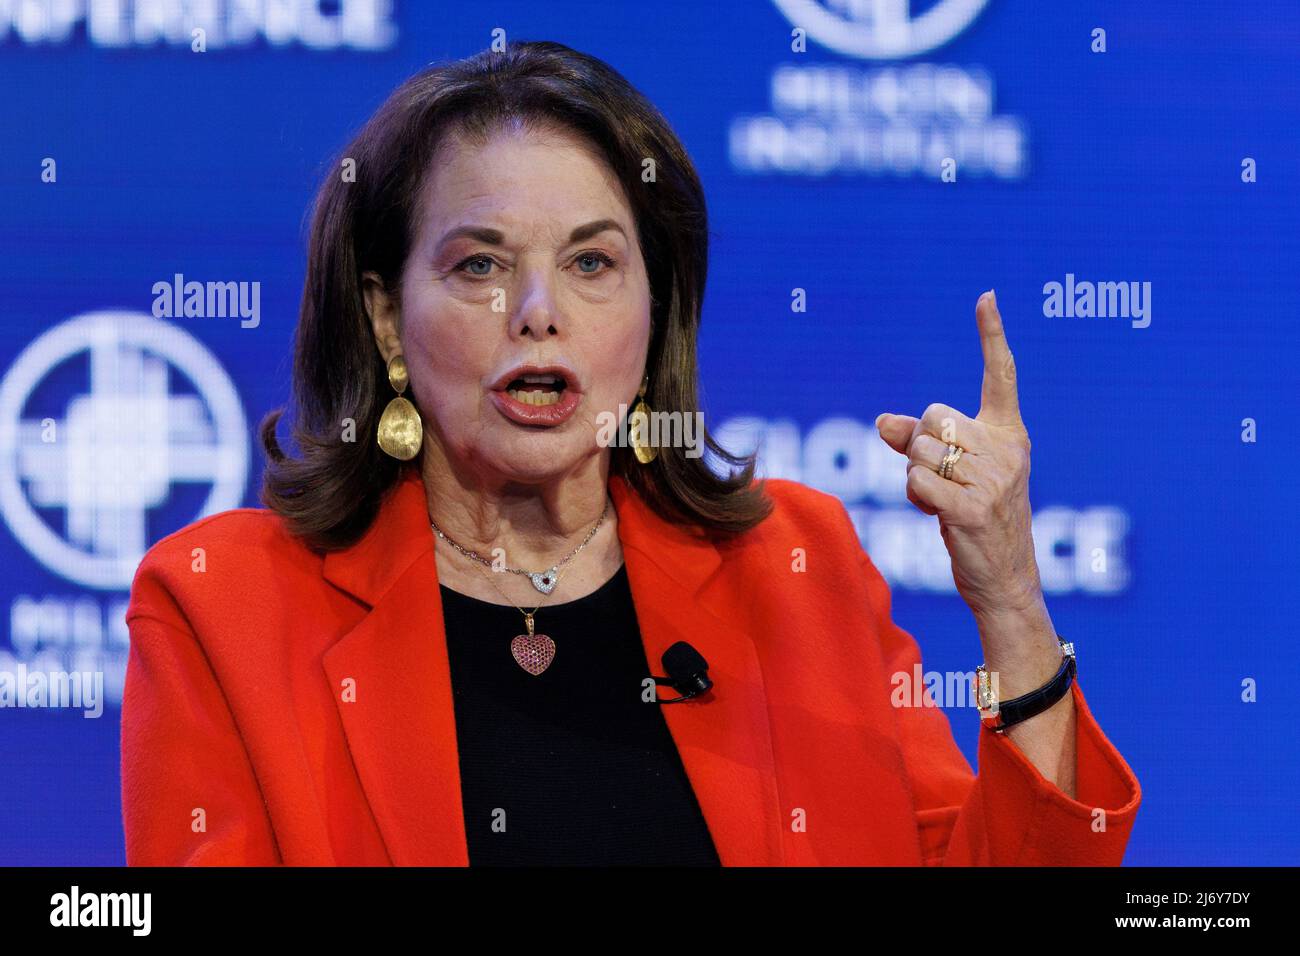 Sherry Lansing, founder and CEO of the Sherry Lansing Foundation and former Chairman and CEO of Paramount Pictures, speaks at the 2022 Milken Institute Global Conference in Beverly Hills, California, U.S., May 4, 2022.  REUTERS/Mike Blake Stock Photo